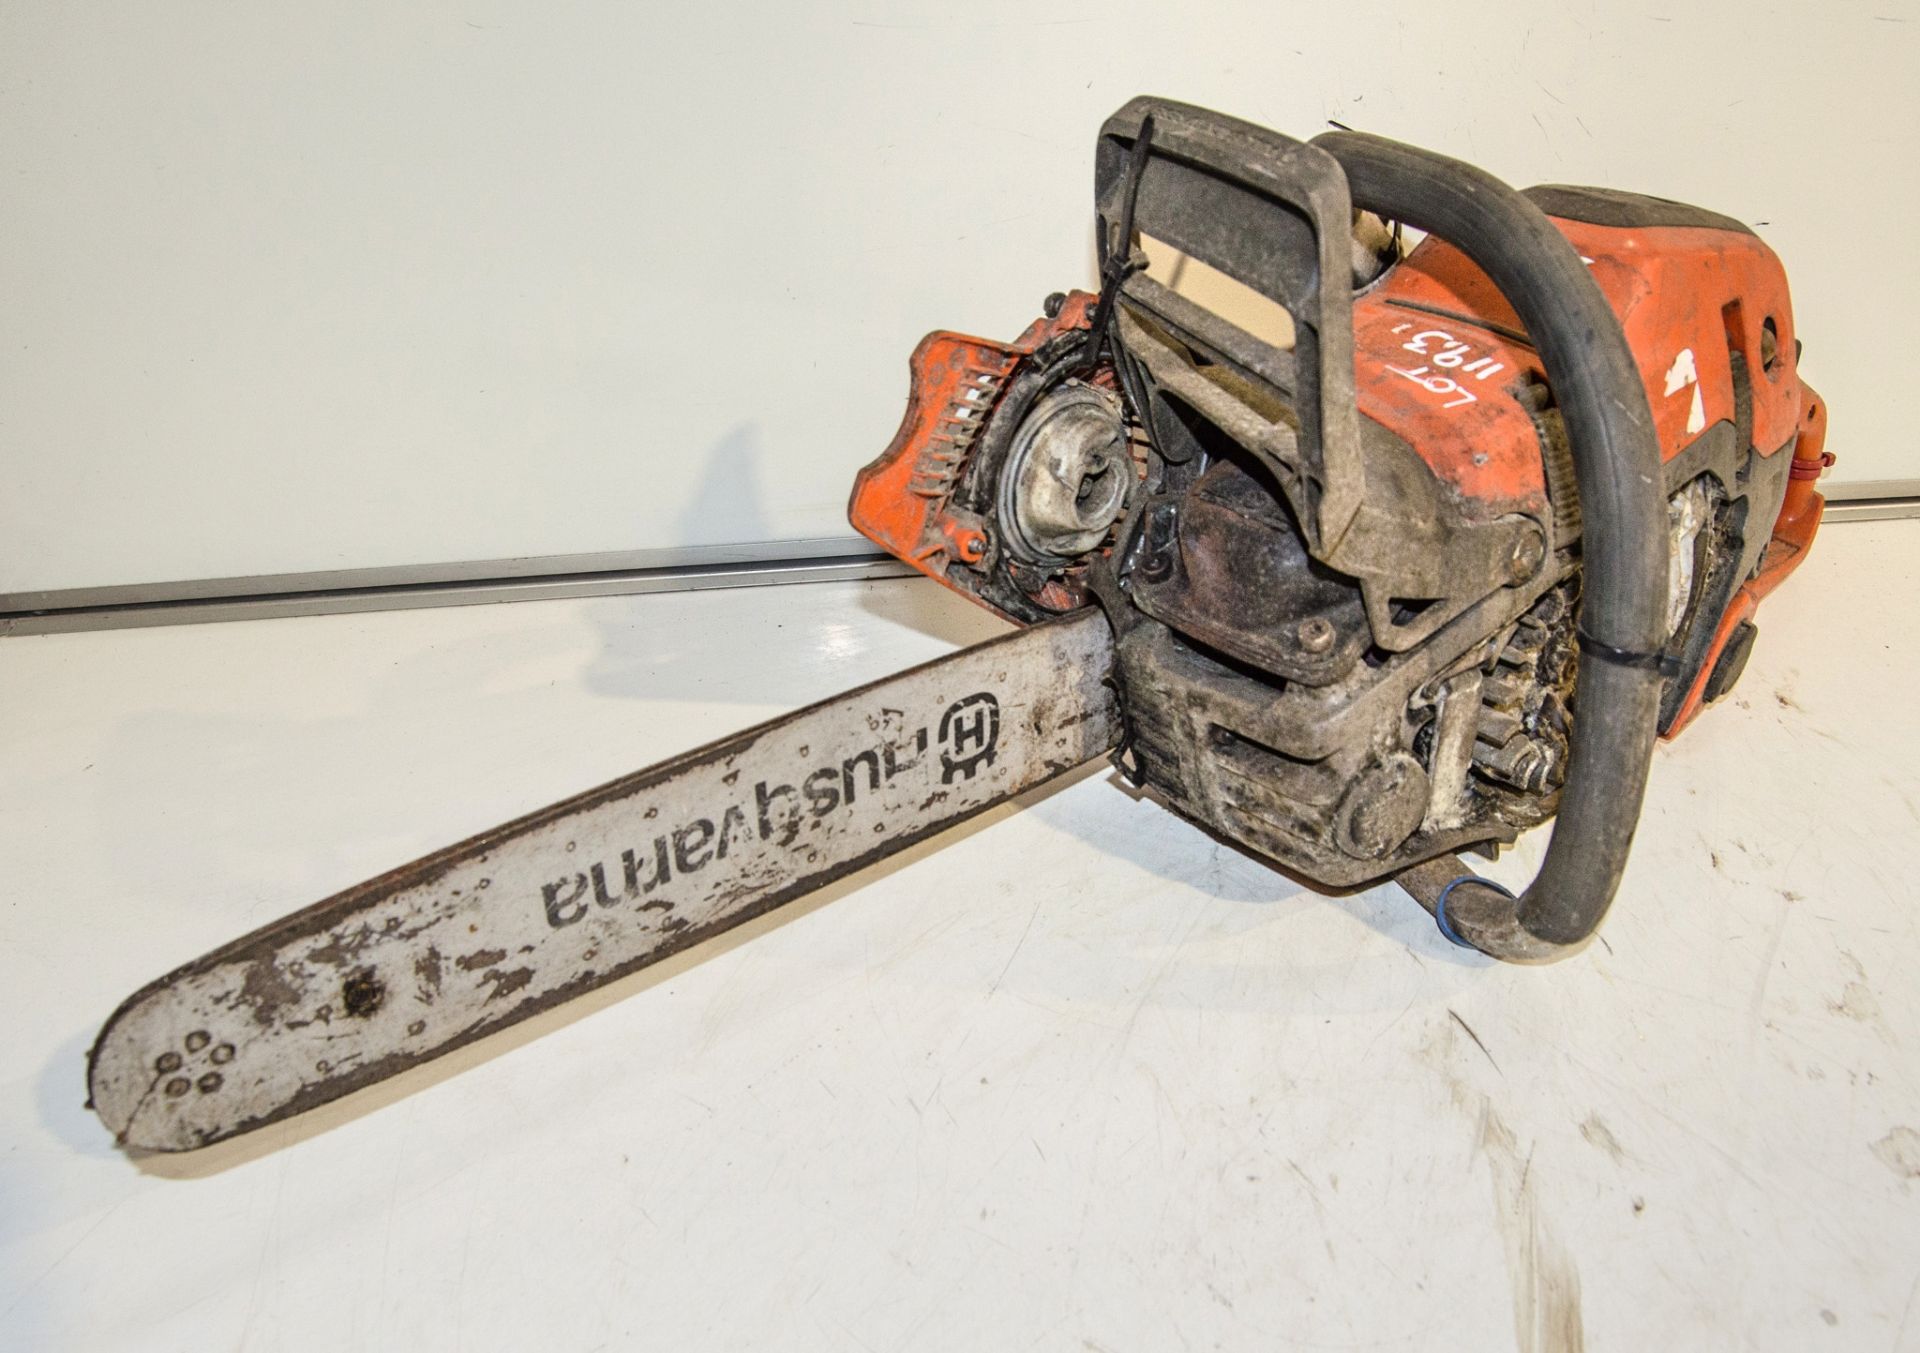 Husqvarna 545 petrol driven chainsaw ** No chain and pull cord assembly dismantled ** 20070206